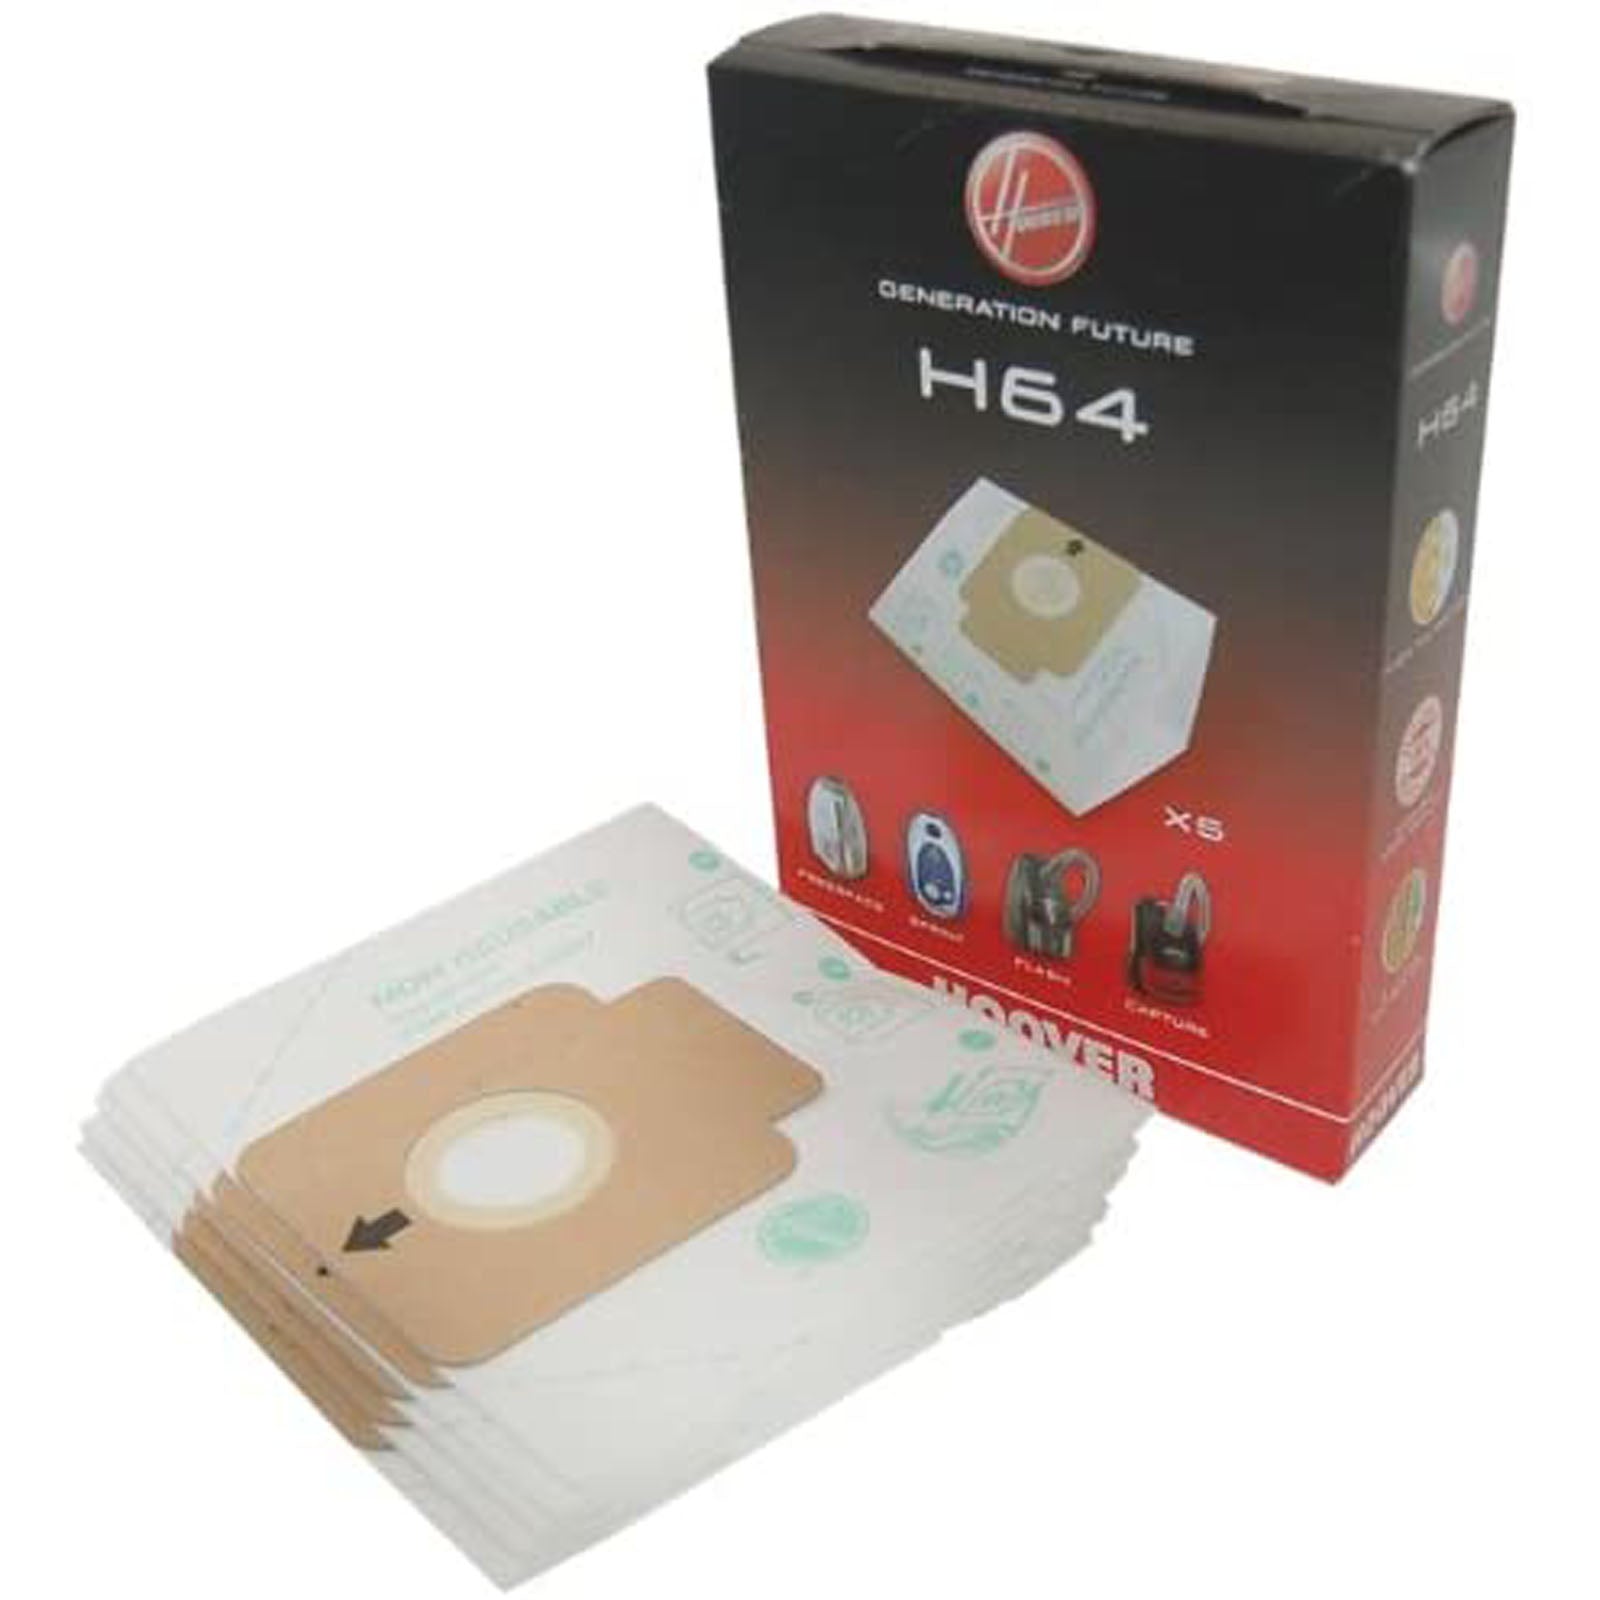 HOOVER Vacuum Cleaner H64 Dust Bag Genuine Freespace Sprint Flash Capture Cylinder 09200245 (Pack of 4)